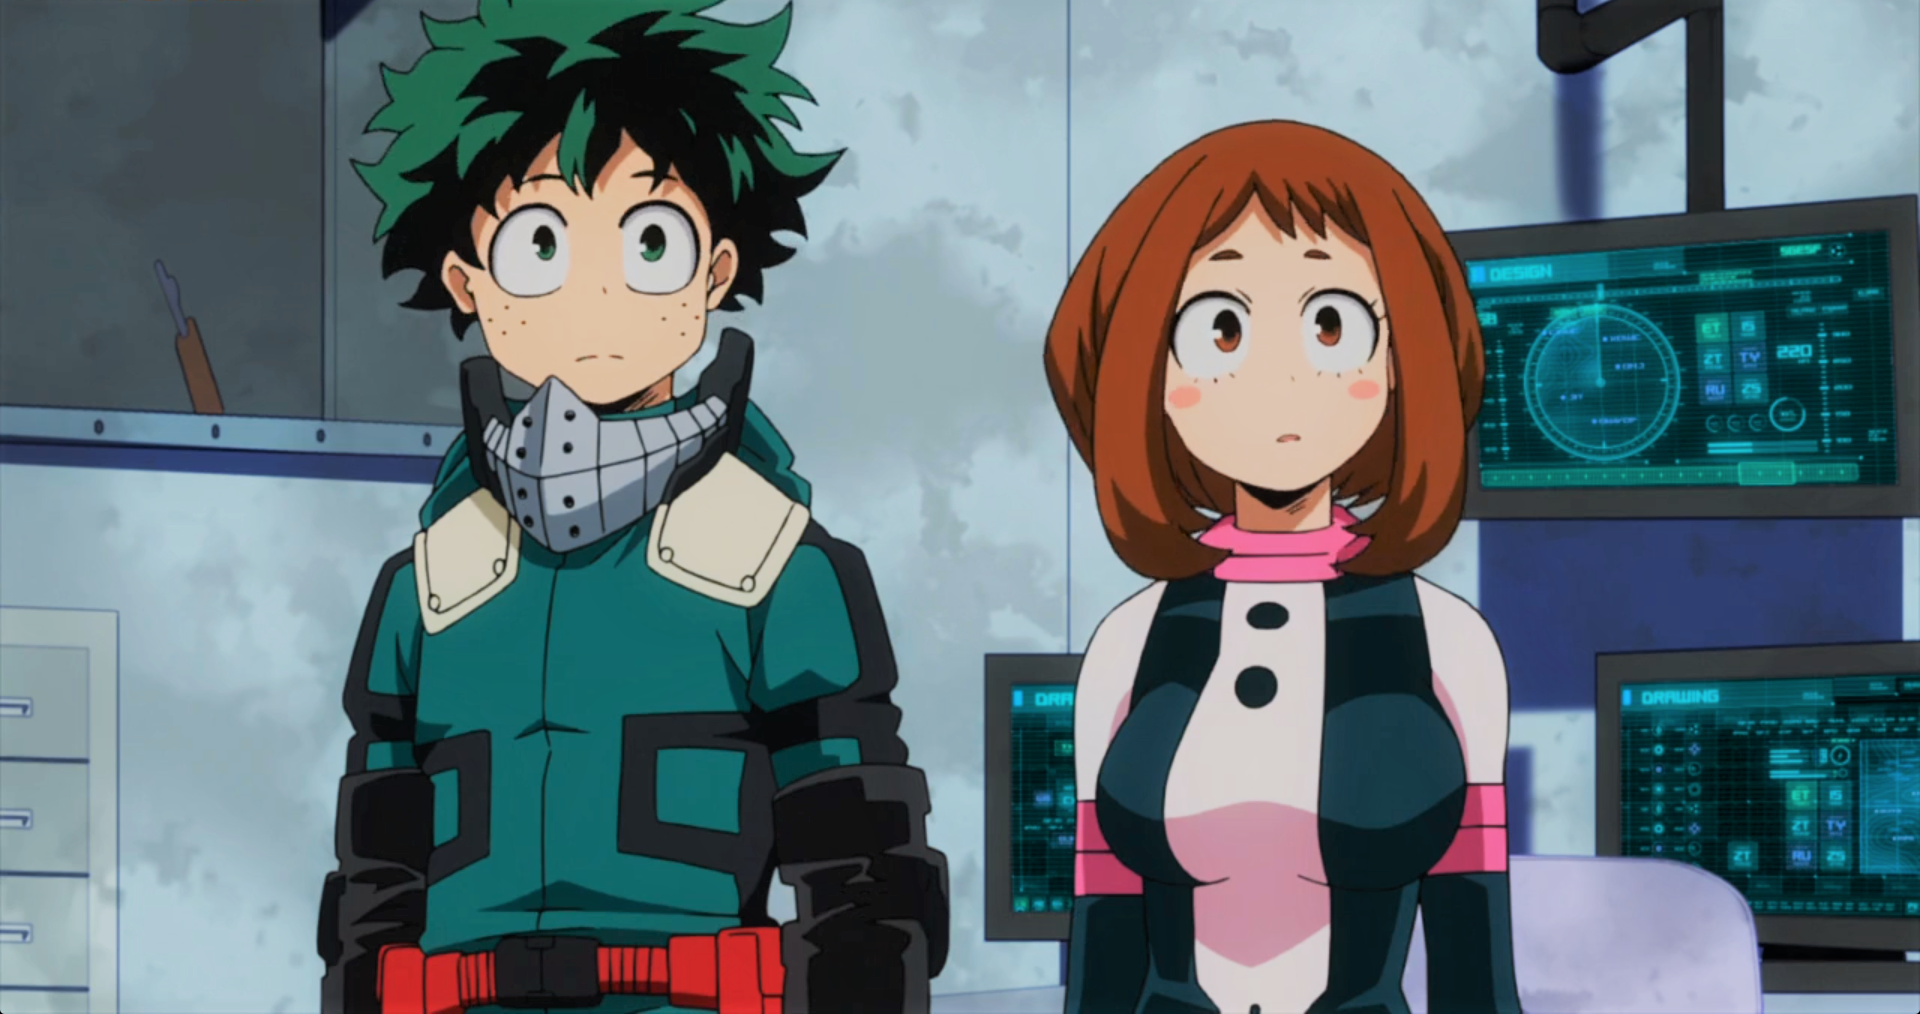 View, Download, Rate, and Comment on this Deku And Uraraka Image. image,ima...